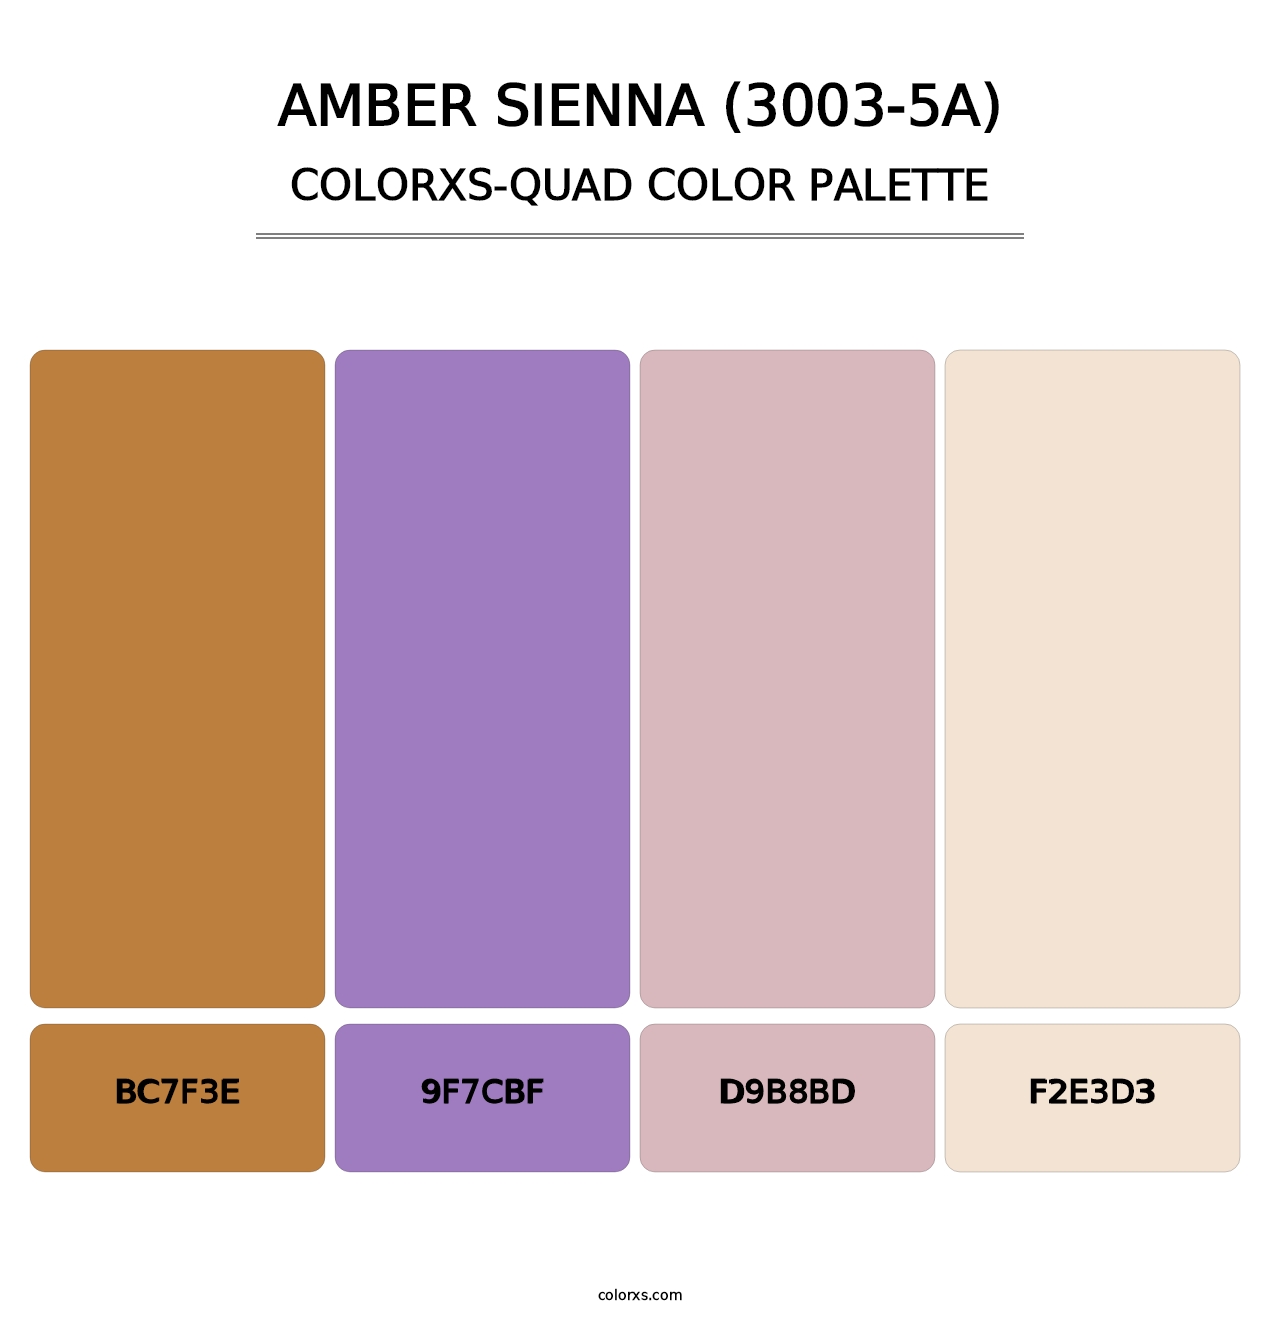 Amber Sienna (3003-5A) - Colorxs Quad Palette